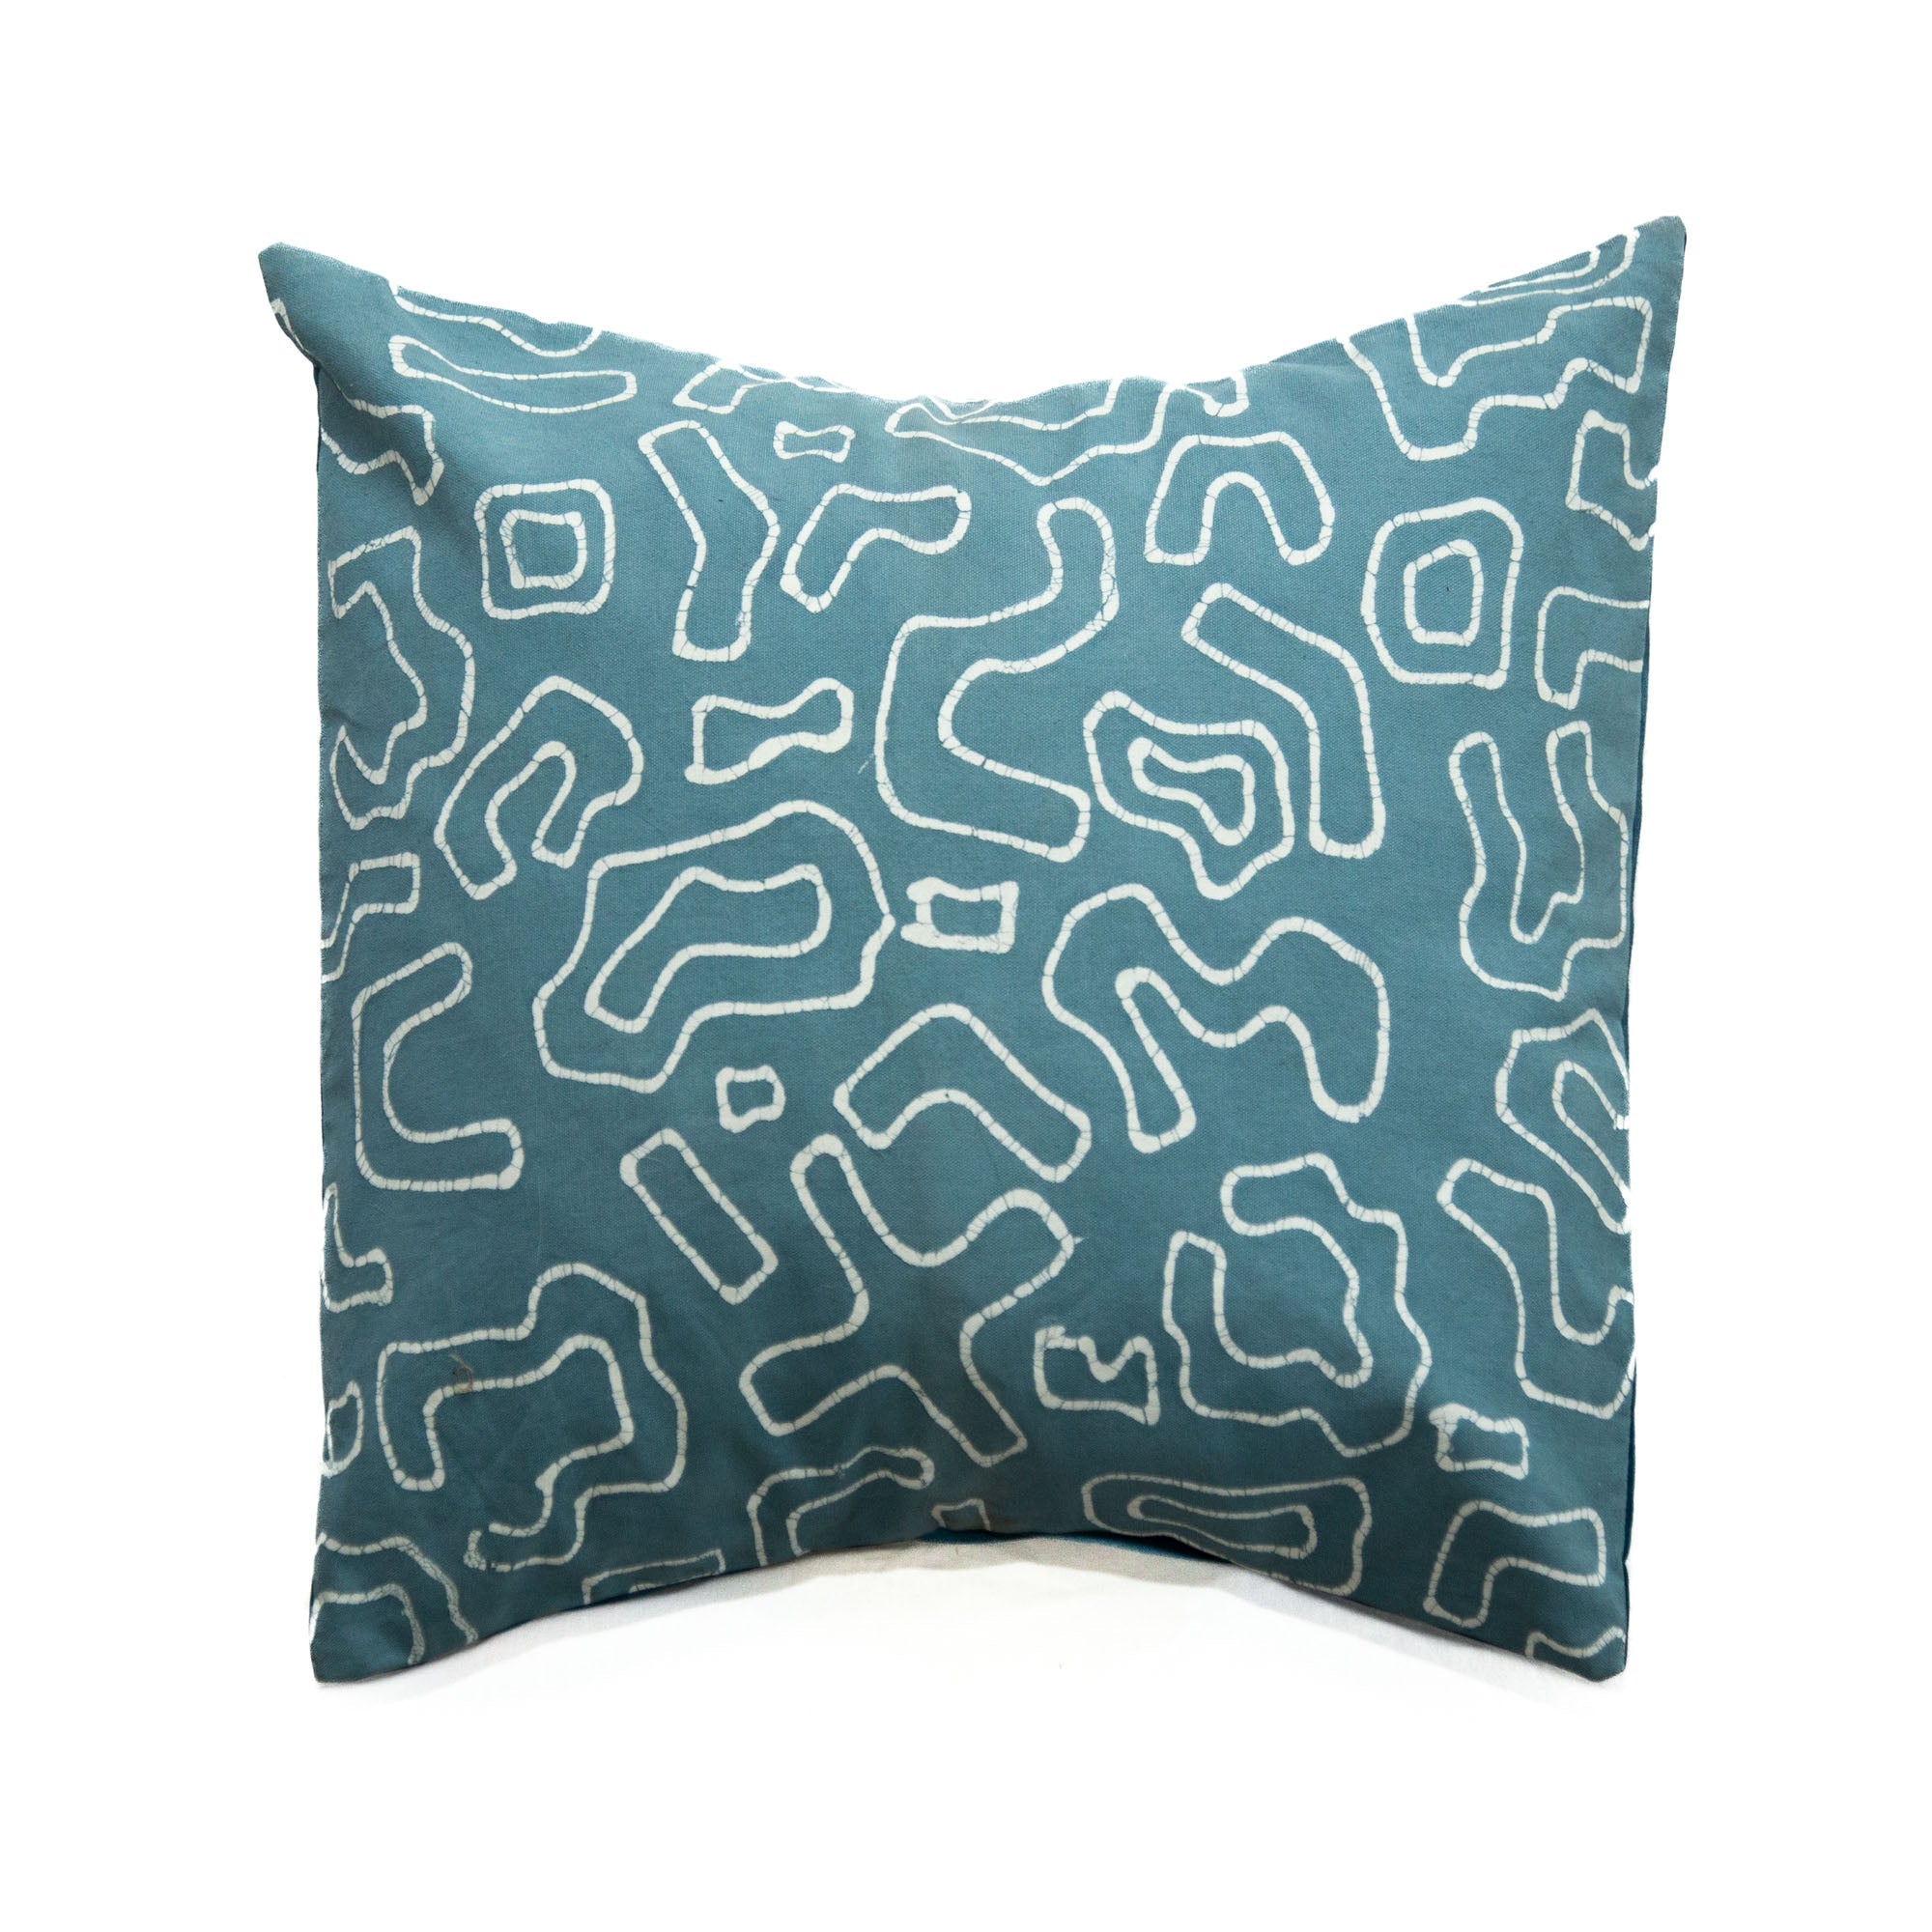 Kuba Blues Outline Teal Cushion Cover - Handmade by TRIBAL TEXTILES - Handcrafted Home Decor Interiors - African Made